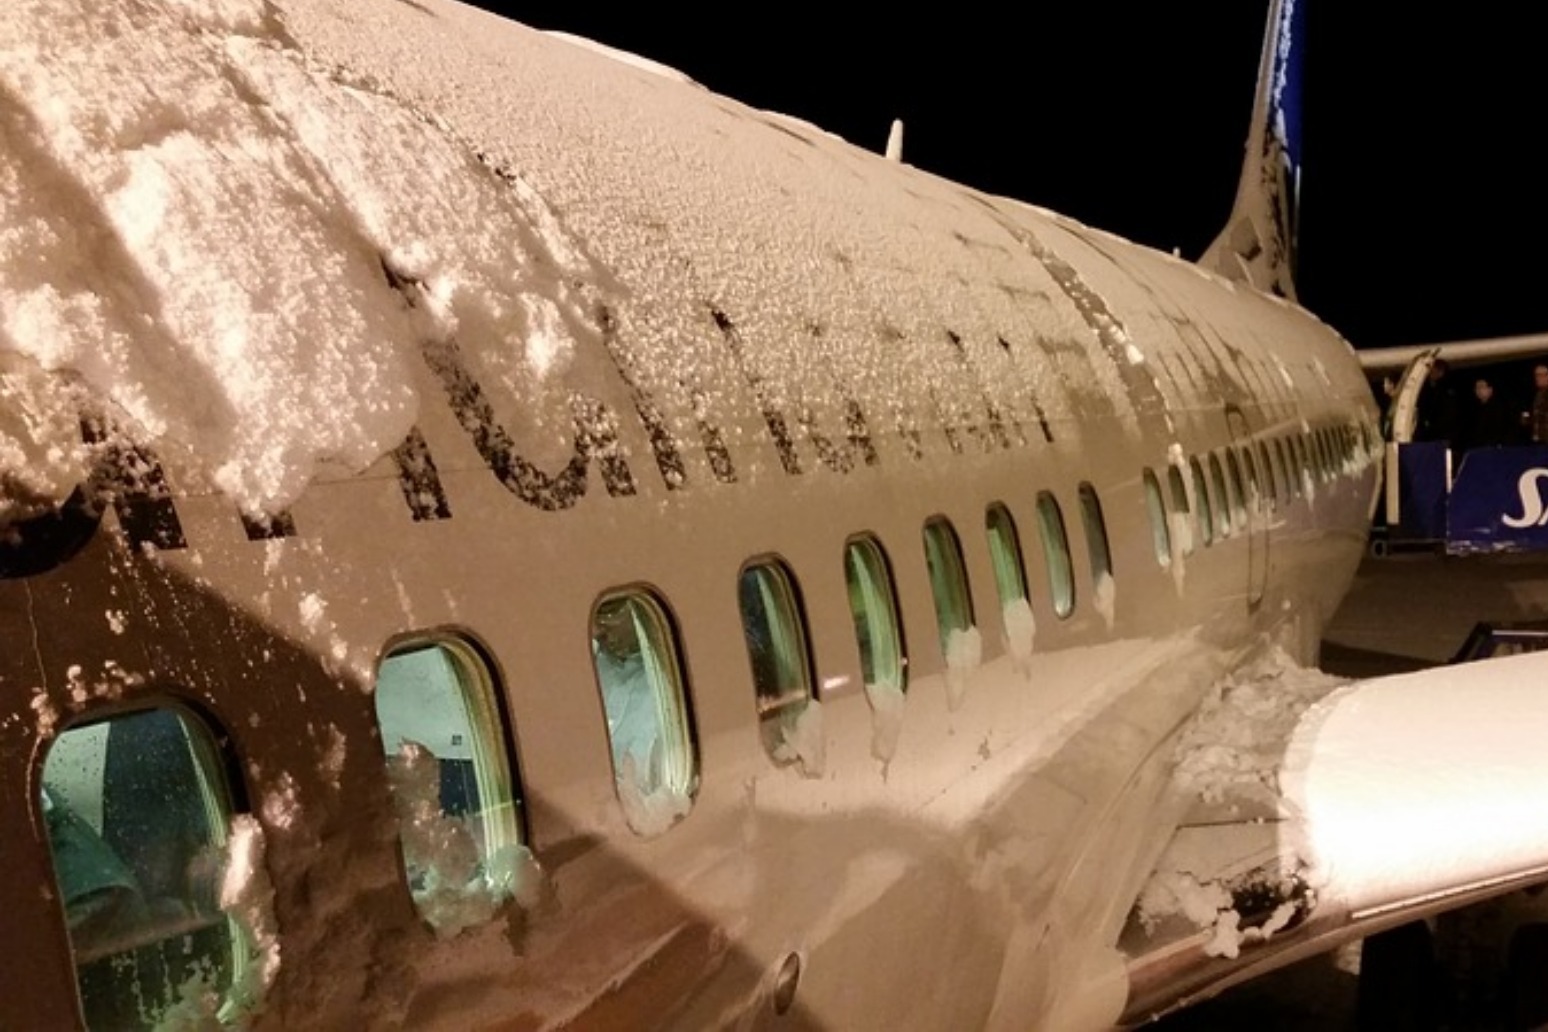 Snow causes widespread disruption across parts of the UK with flights grounded 